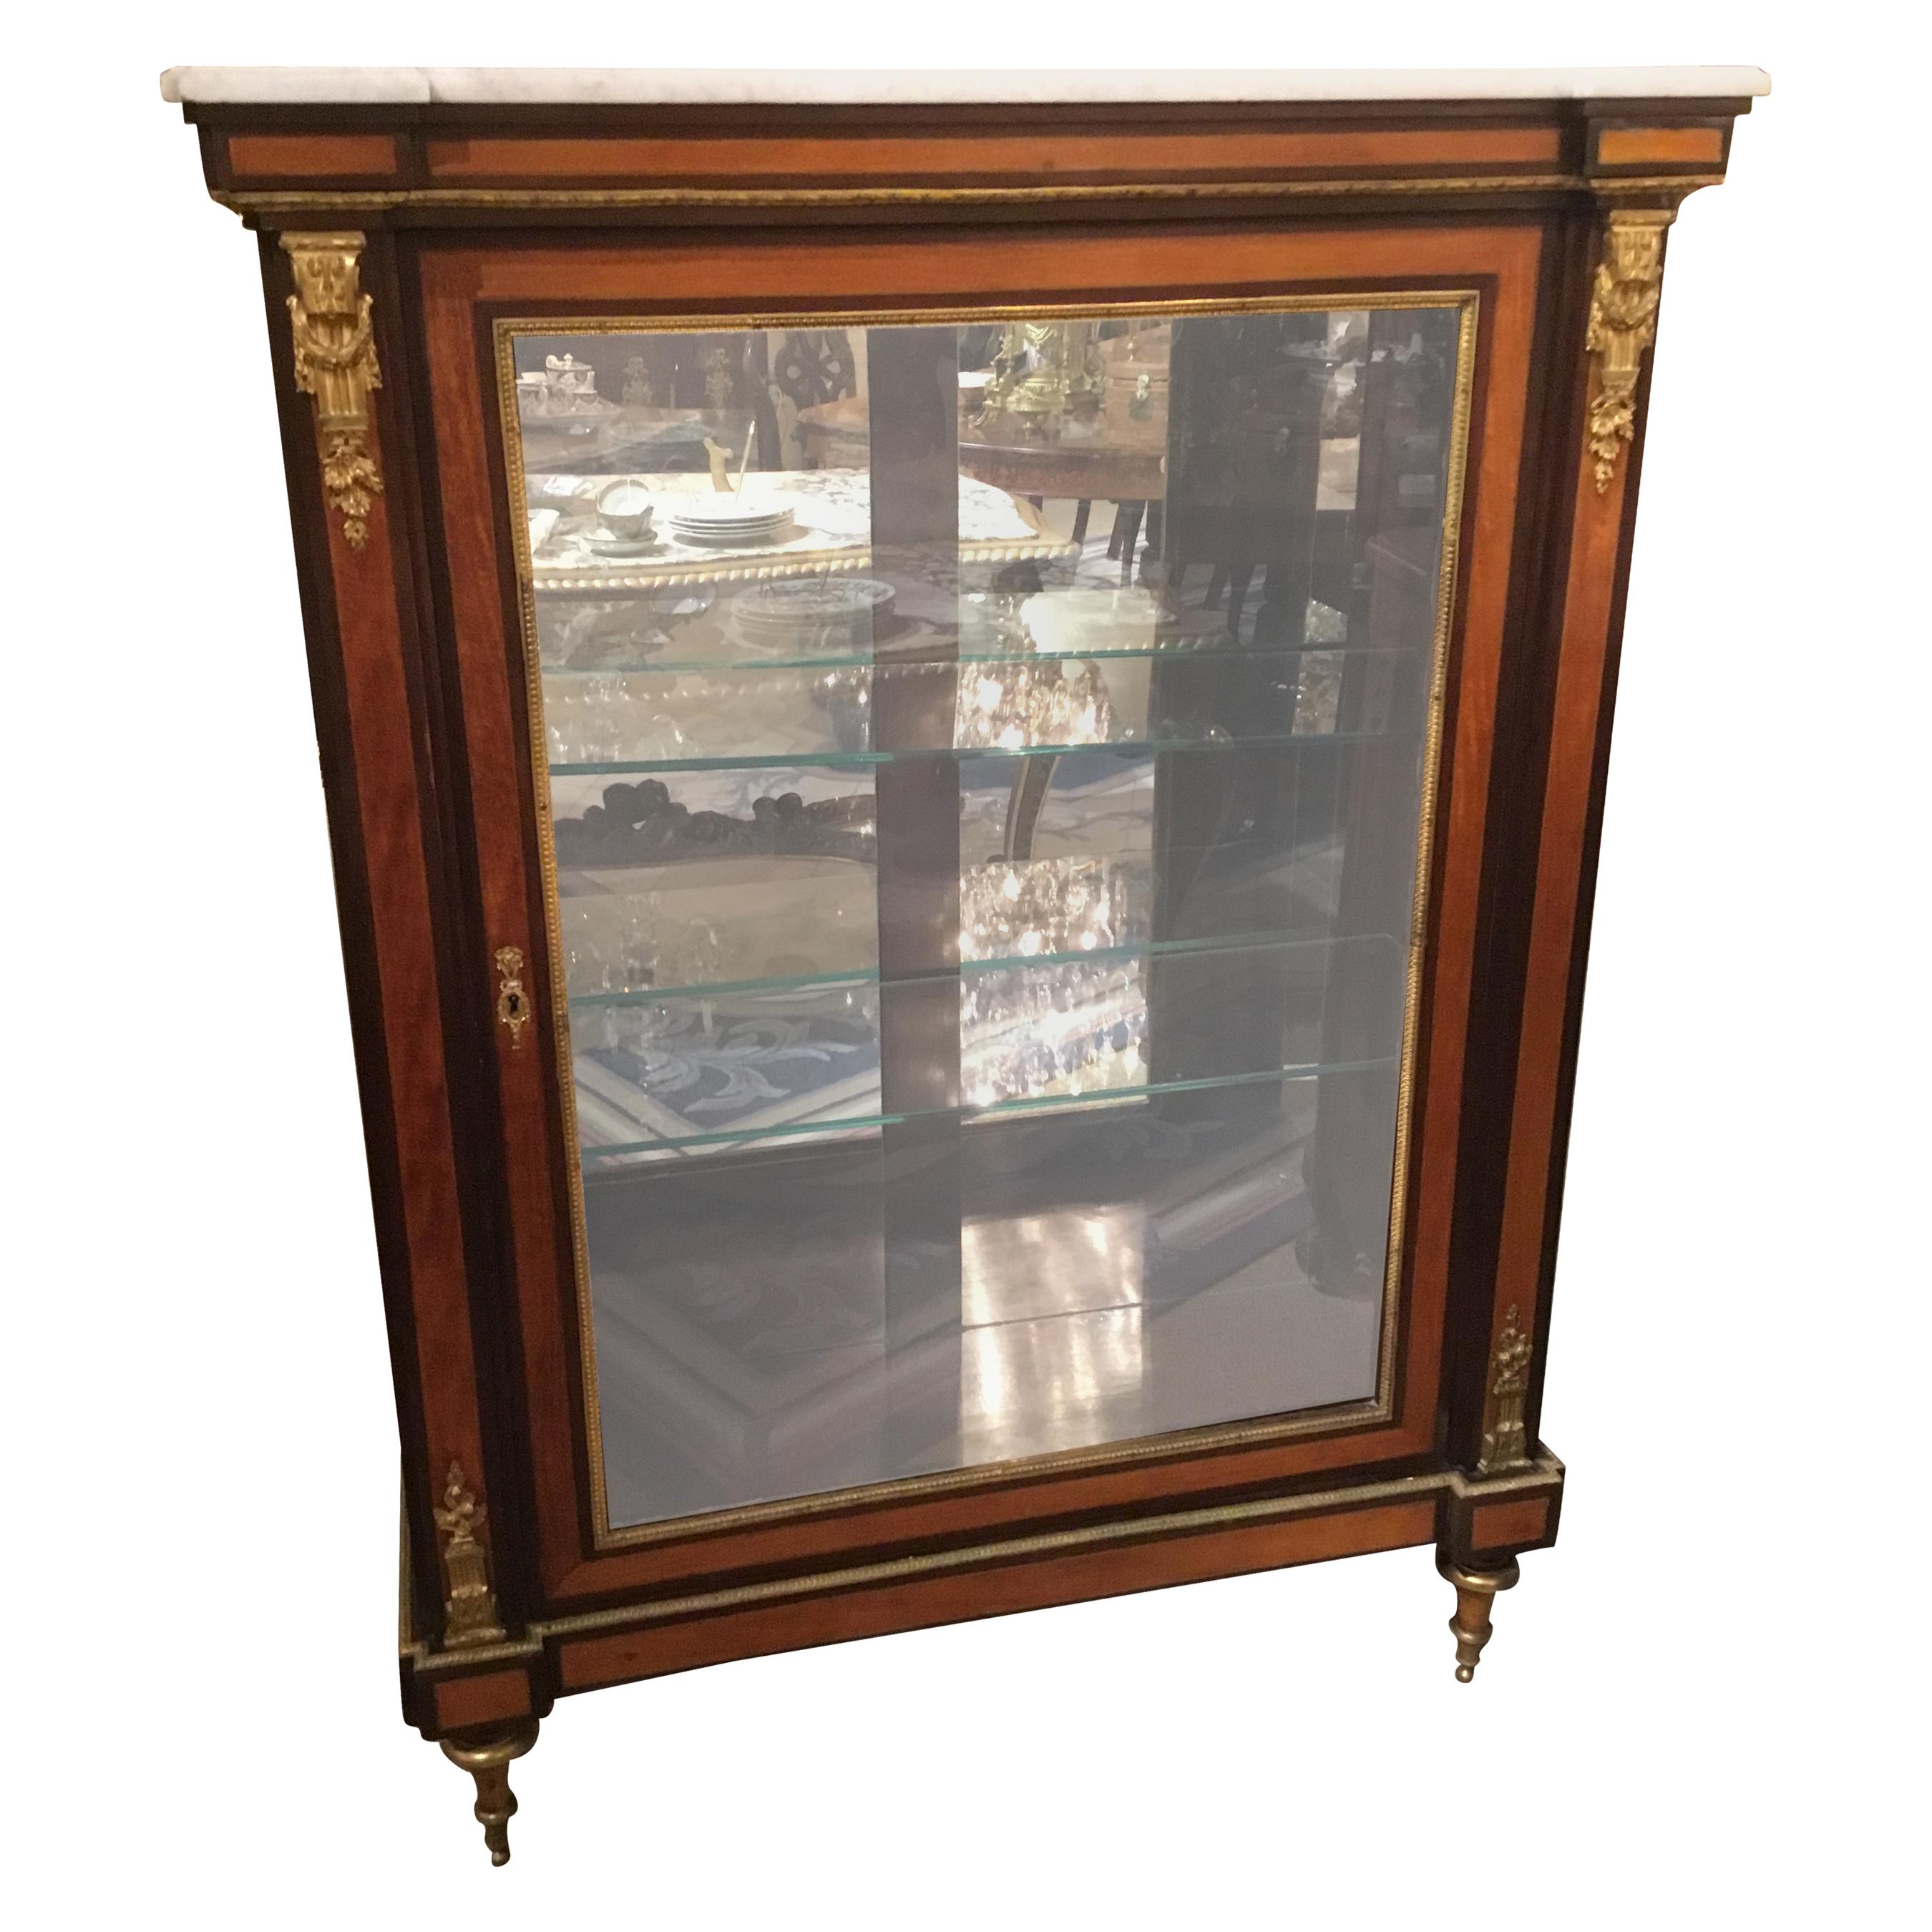 Louis XVI-Style Display/Vitrine Cabinet in Rosewood with Bronze Dore Mounts